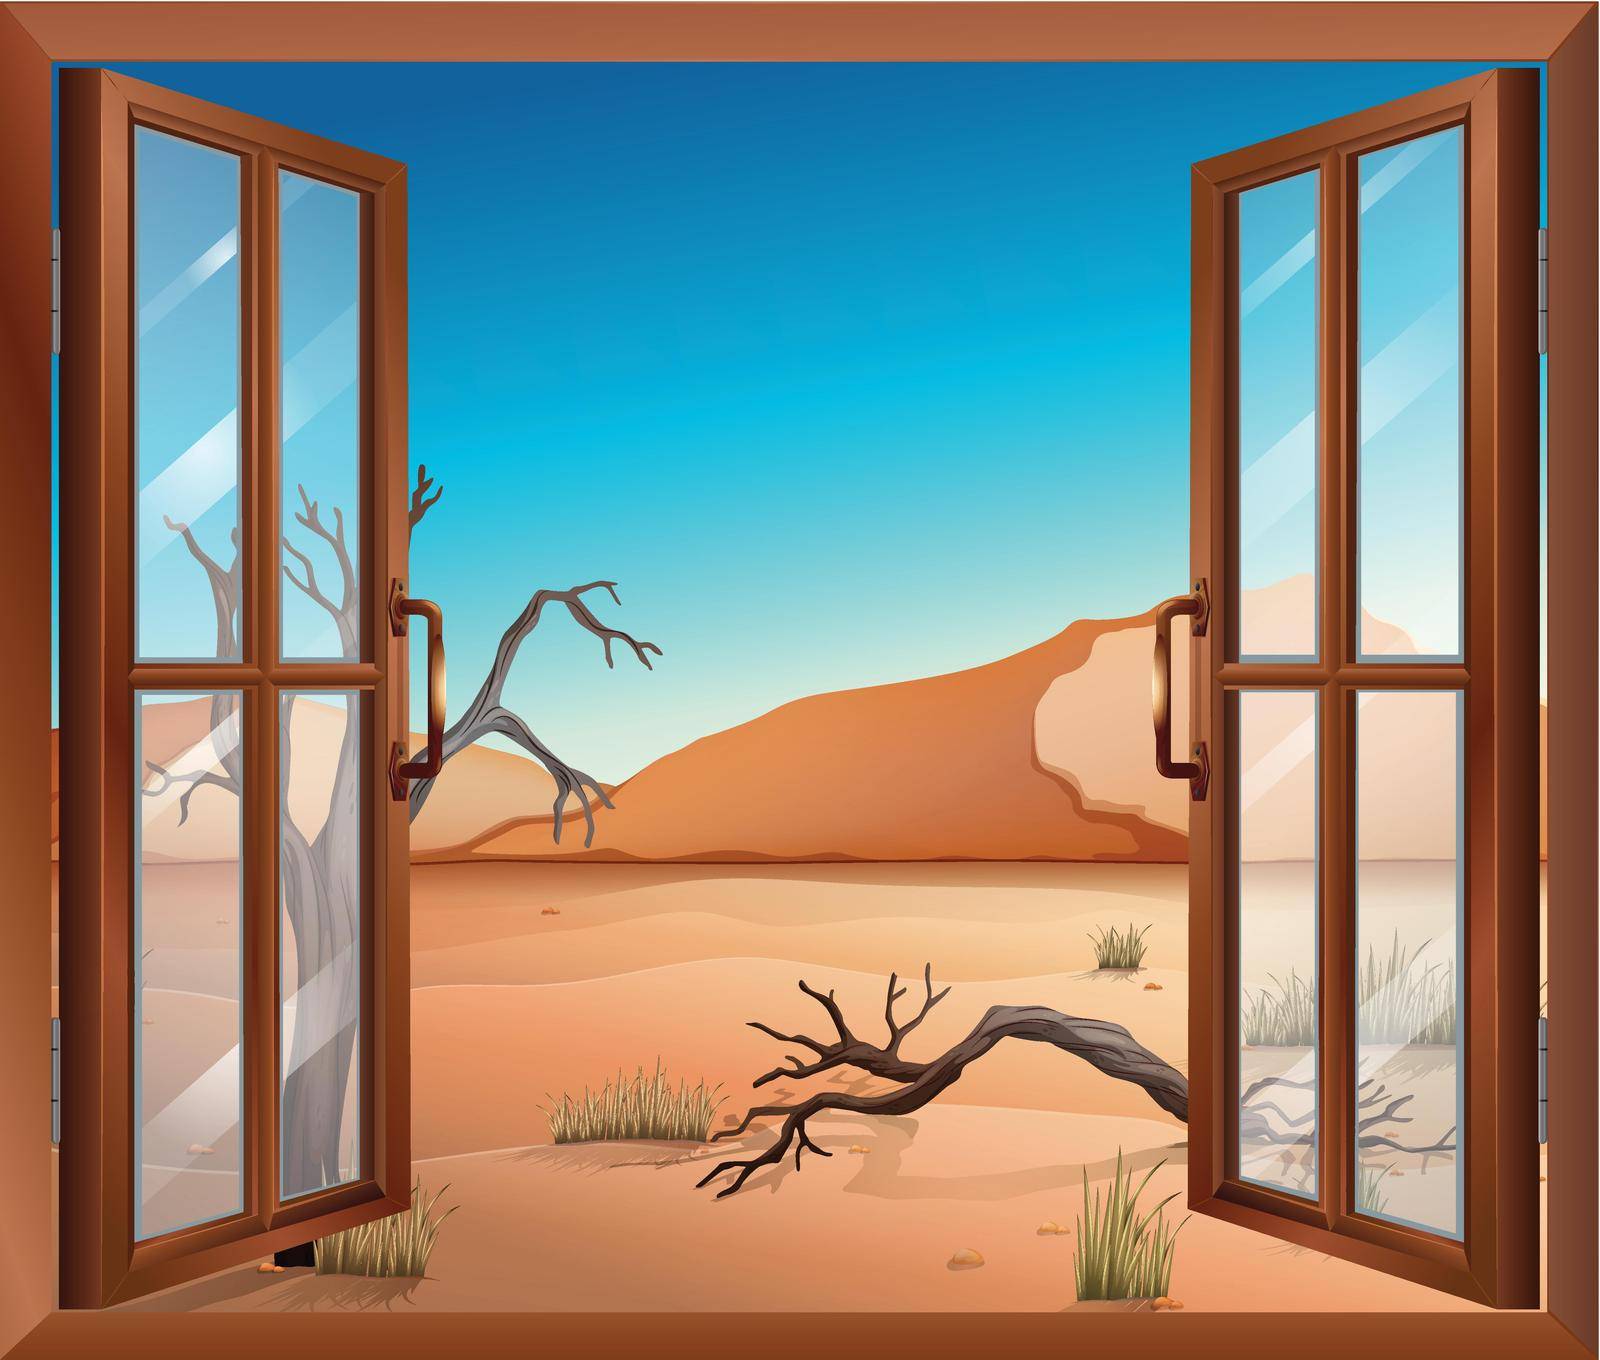 Illustration of an open window with a view of the desert